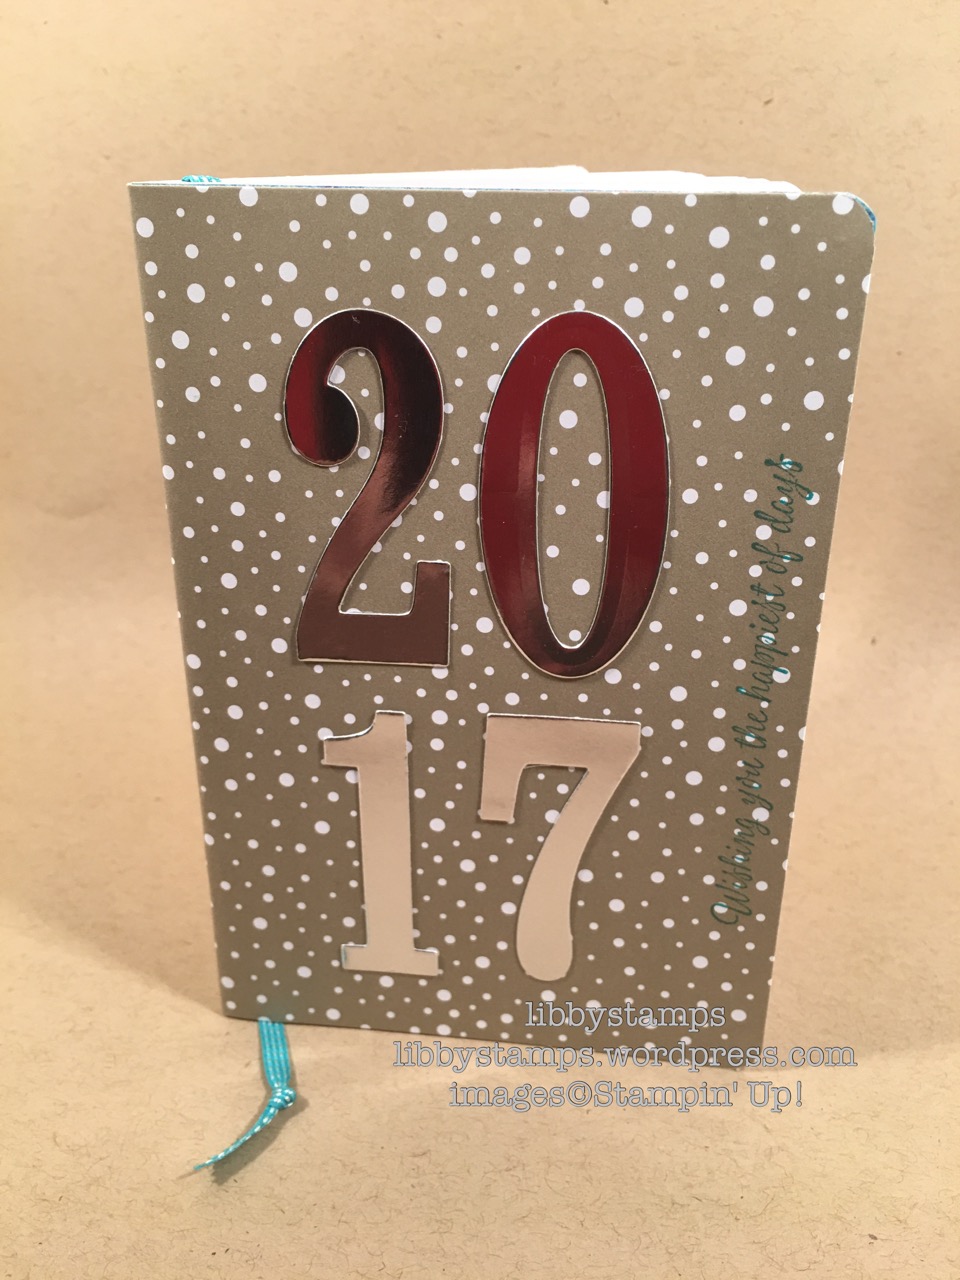 libbystamps, stampin up, Silver Foil, Large Numbers Framelits, Frosted Medallion, Candy Cane Lane DSP, Bermuda Bay 1/8 Stitched Ribbon, date book